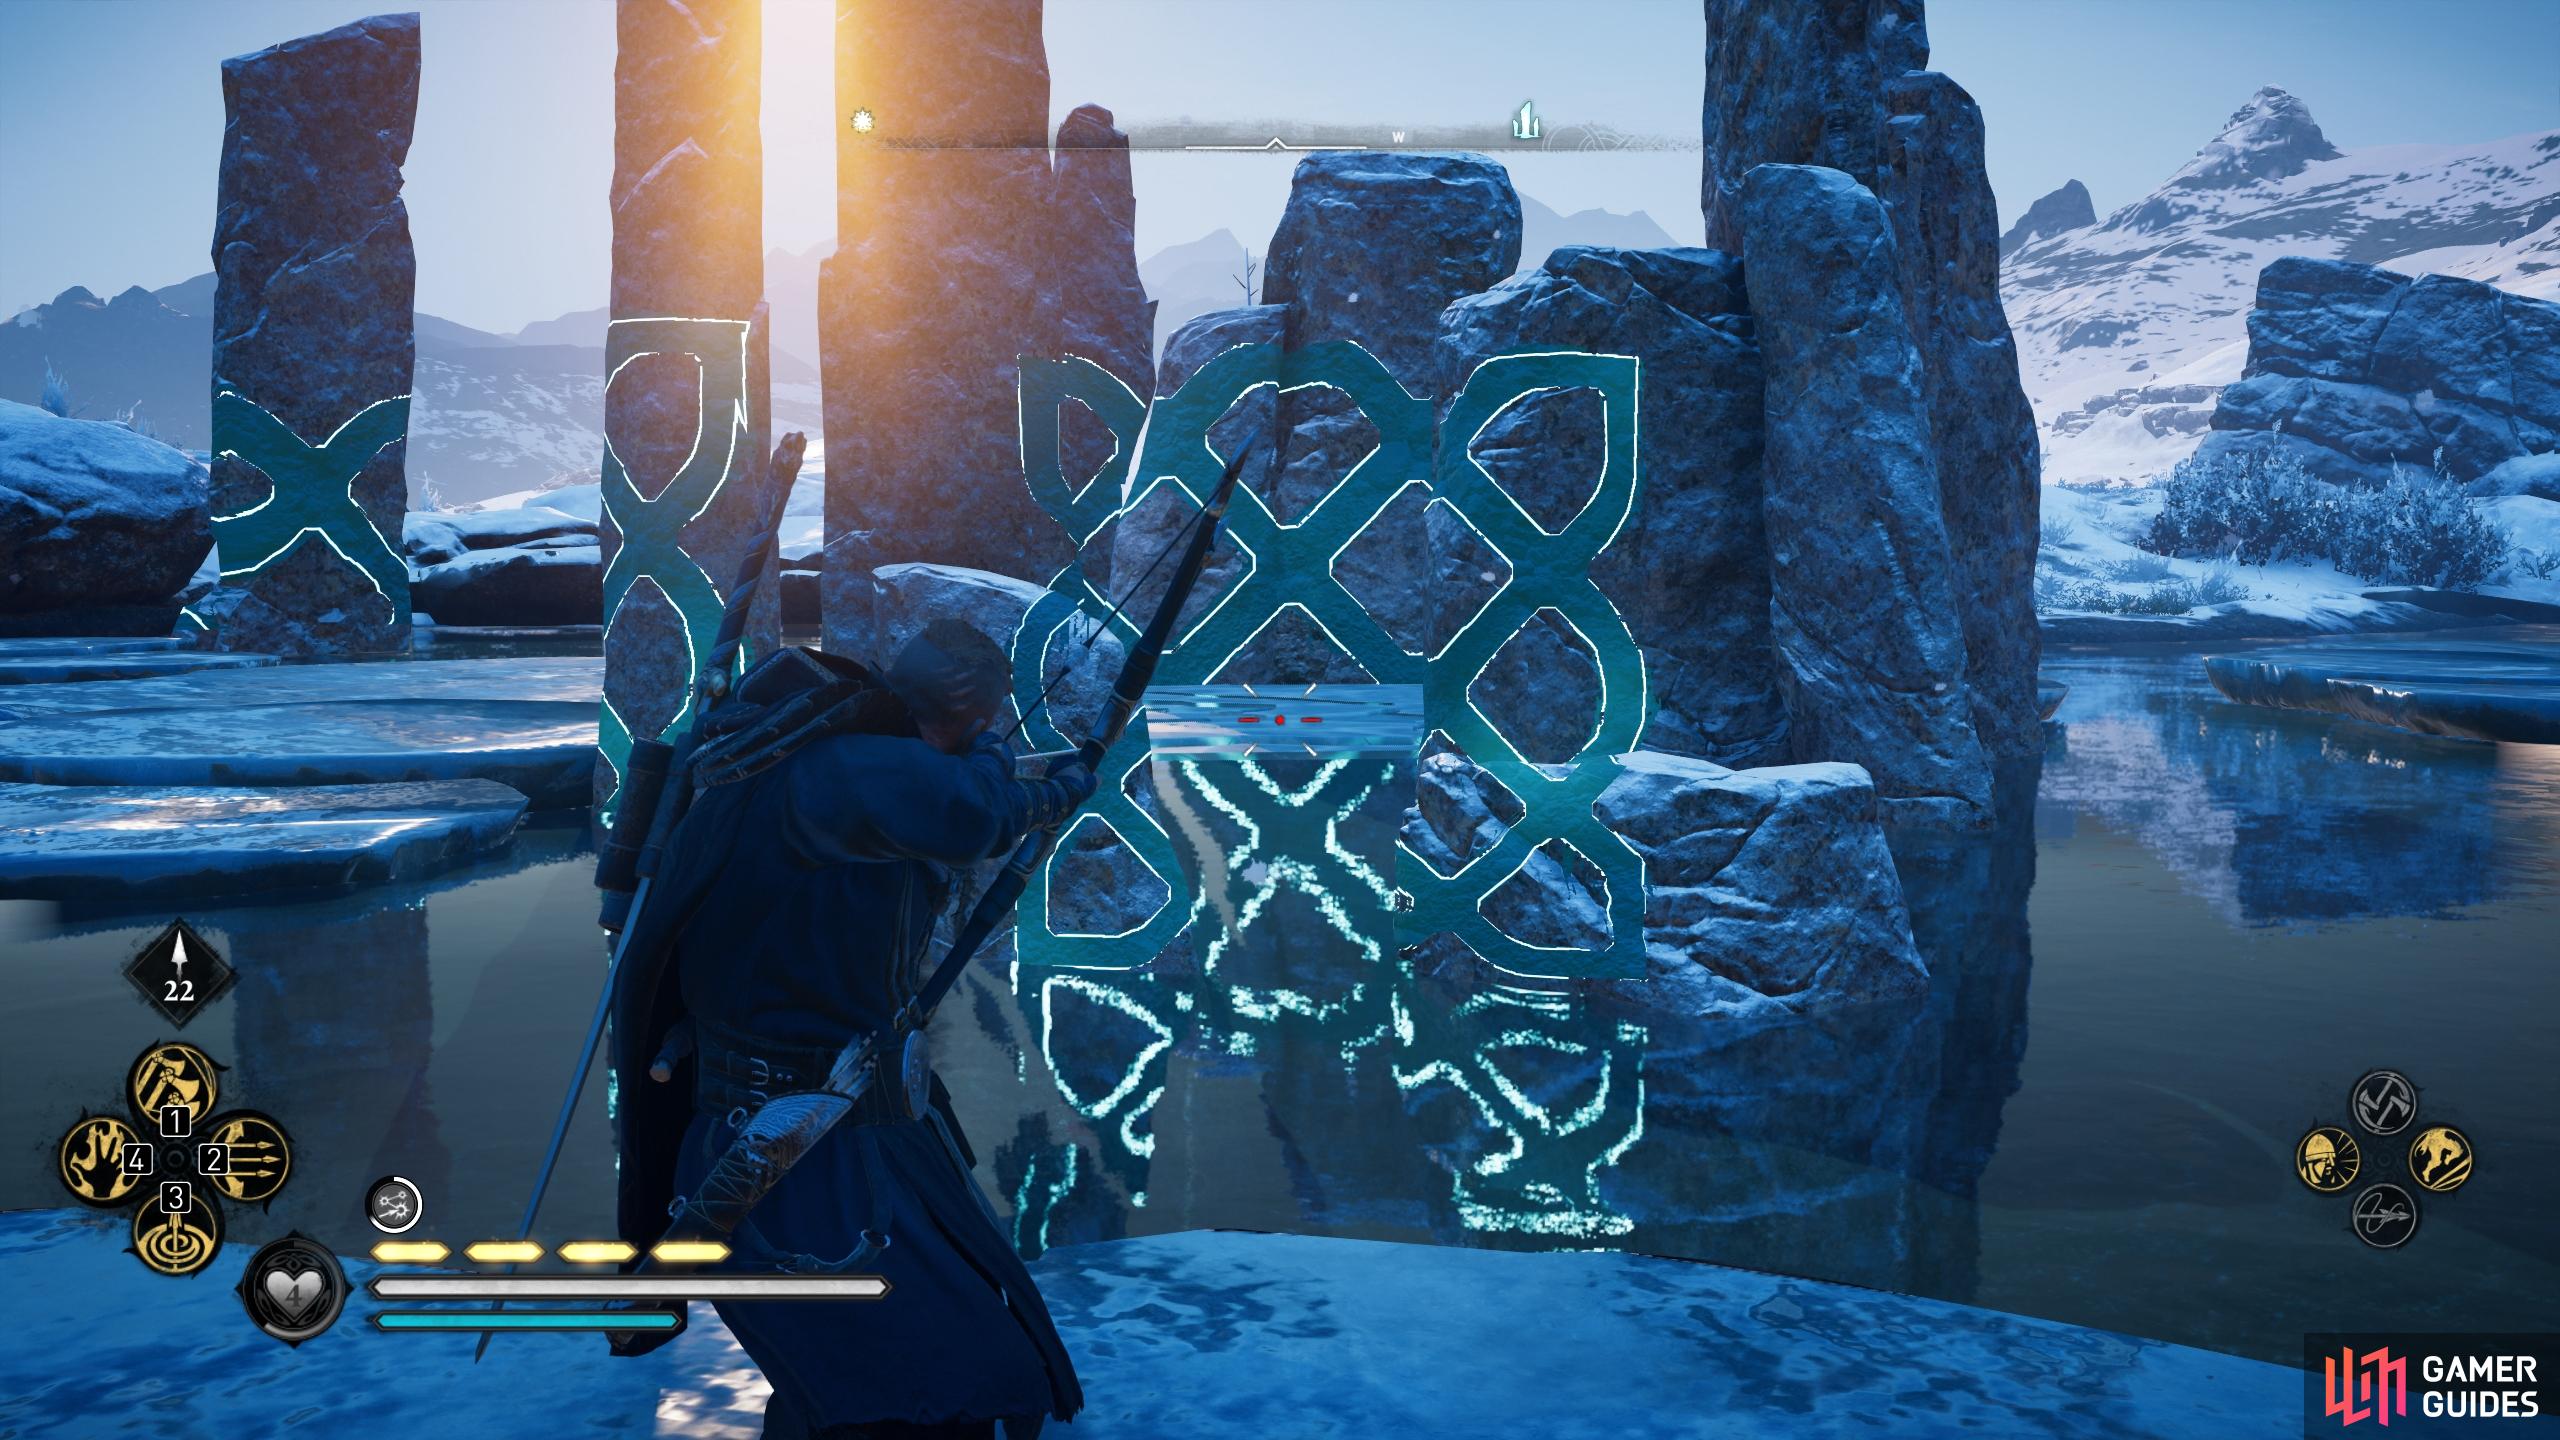 You'll need to destroy the ice at the centre of the symbol before you can align it.